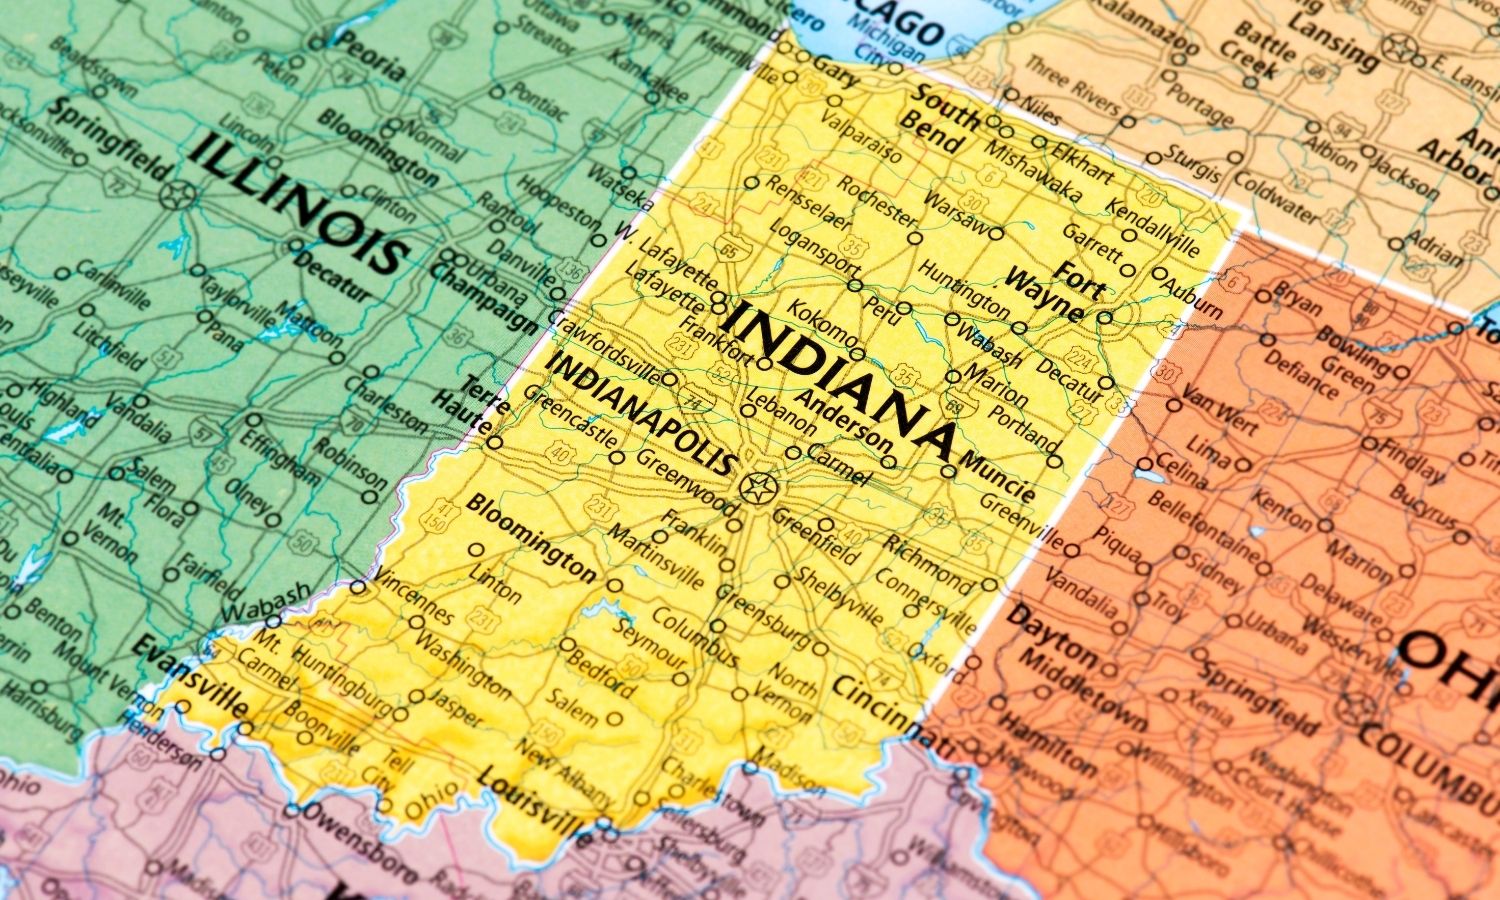 OTD in 1816: Indiana became the 19th state to join the United States of America.